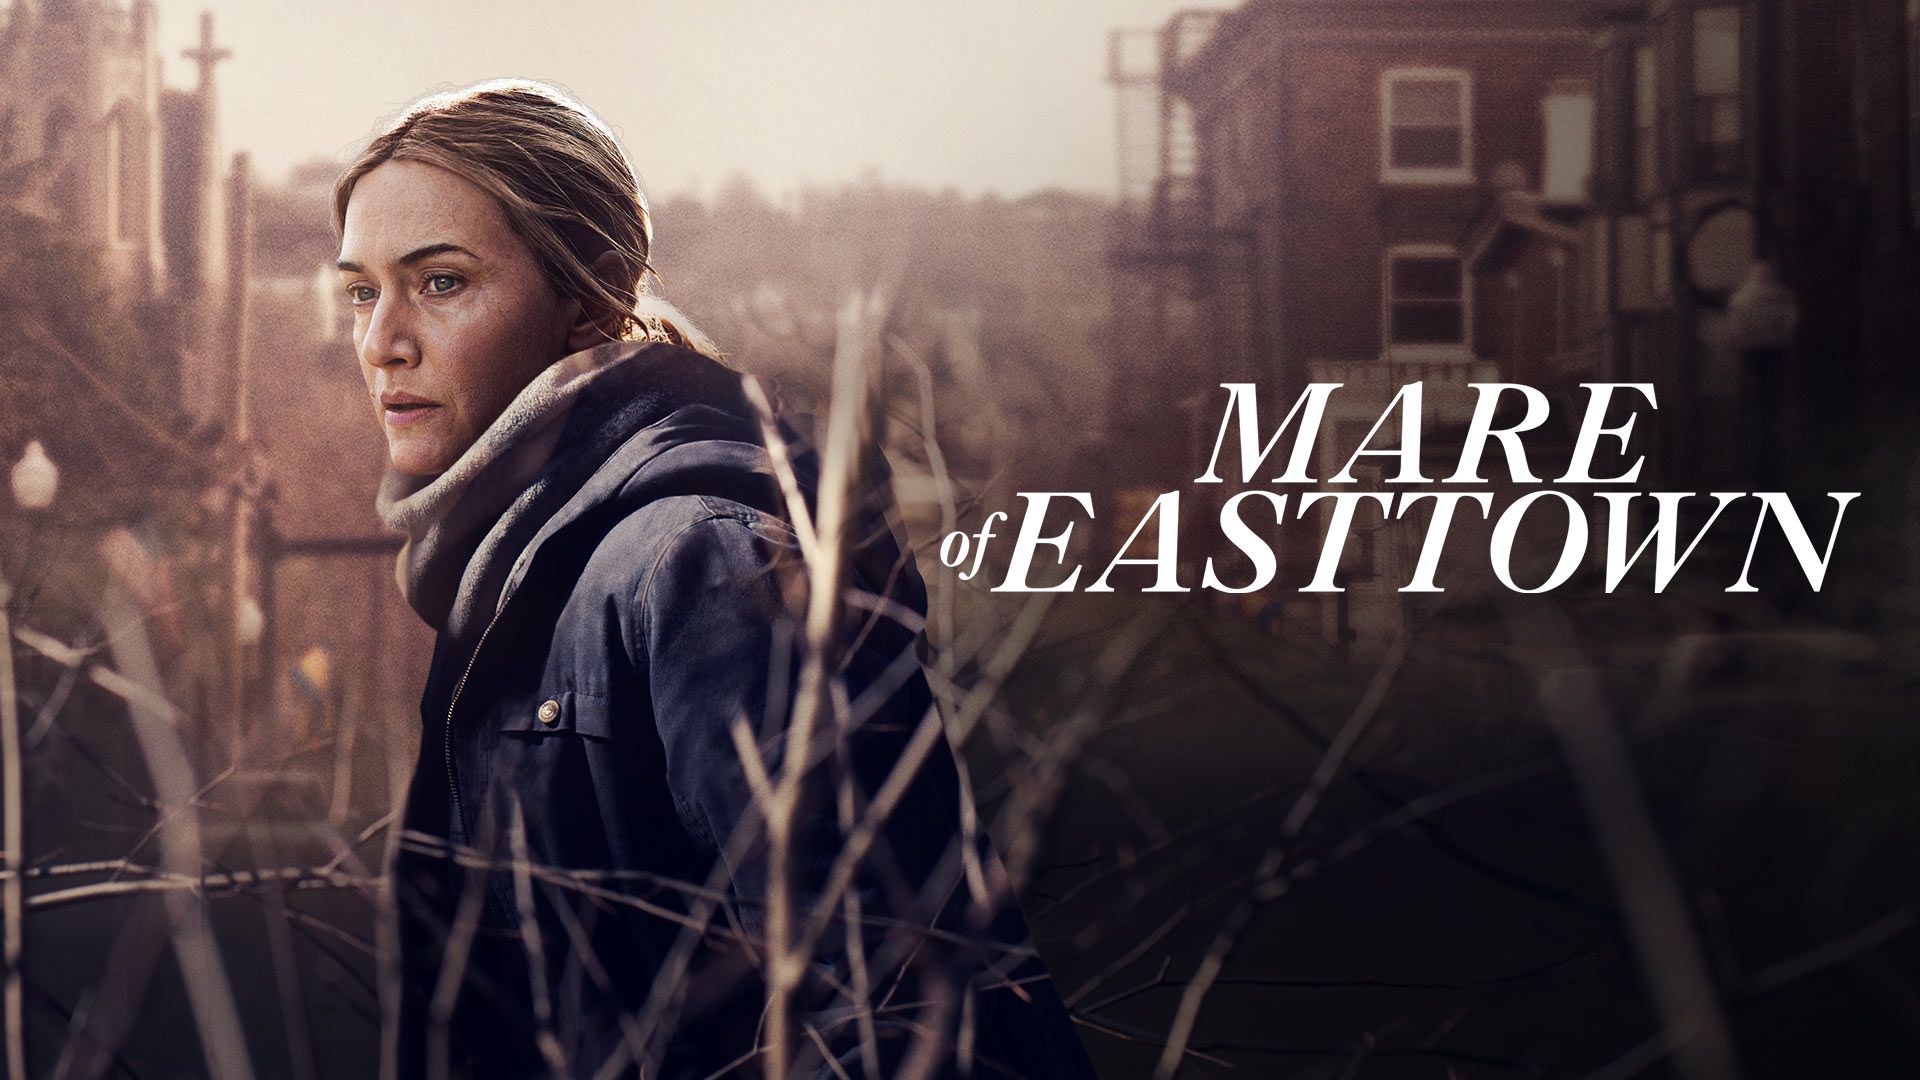 Watch All Seasons of Mare of Easttown on Disney+ Hotstar